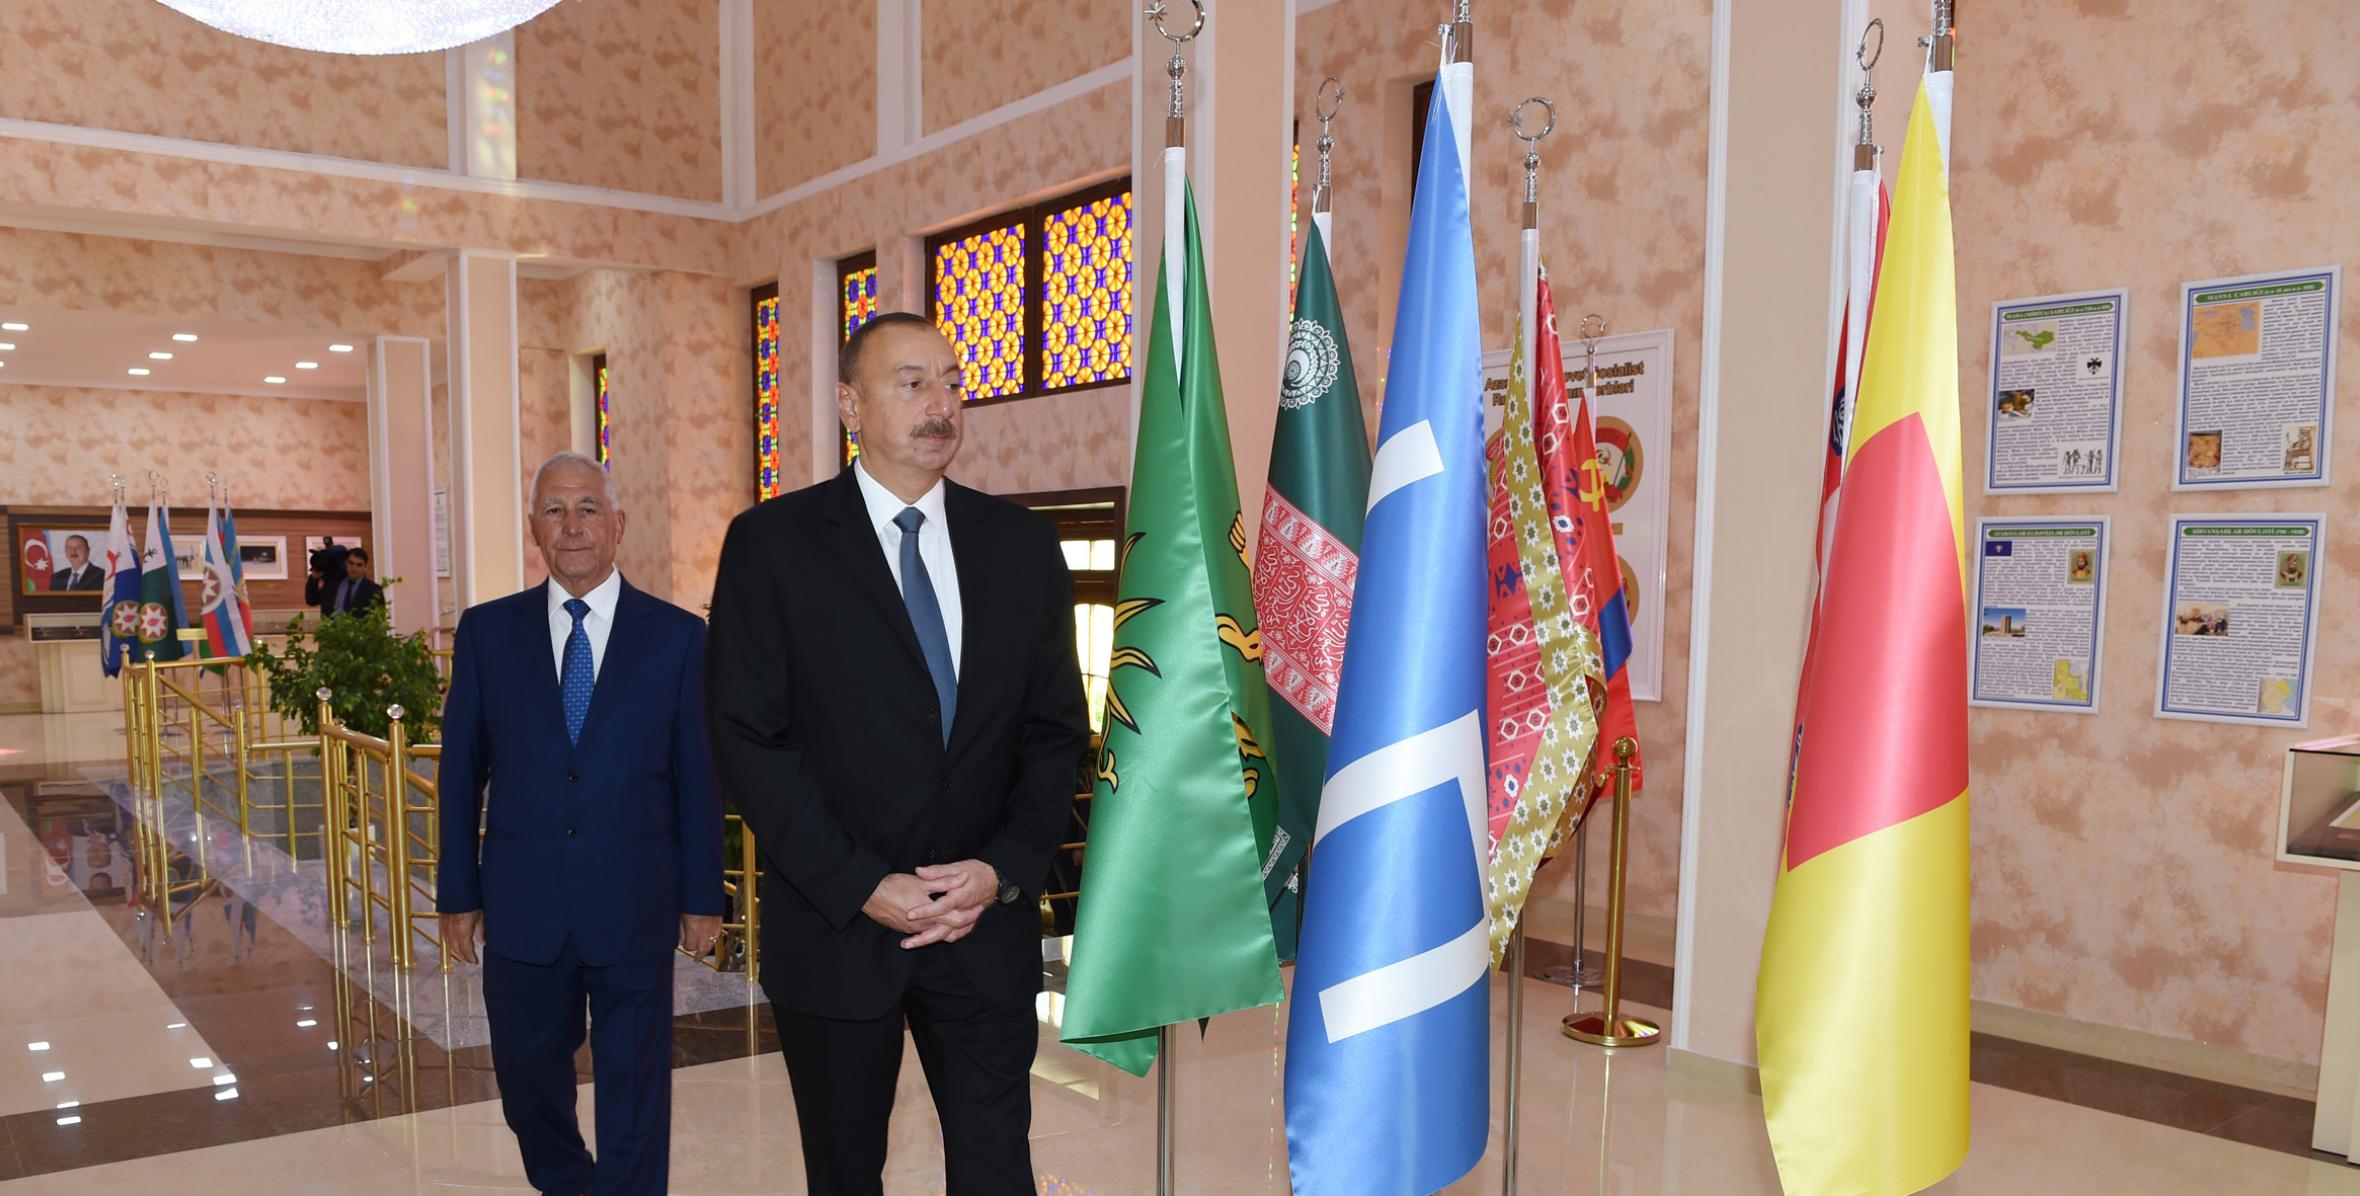 Ilham Aliyev viewed Flag Square and Flag Museum in Khachmaz